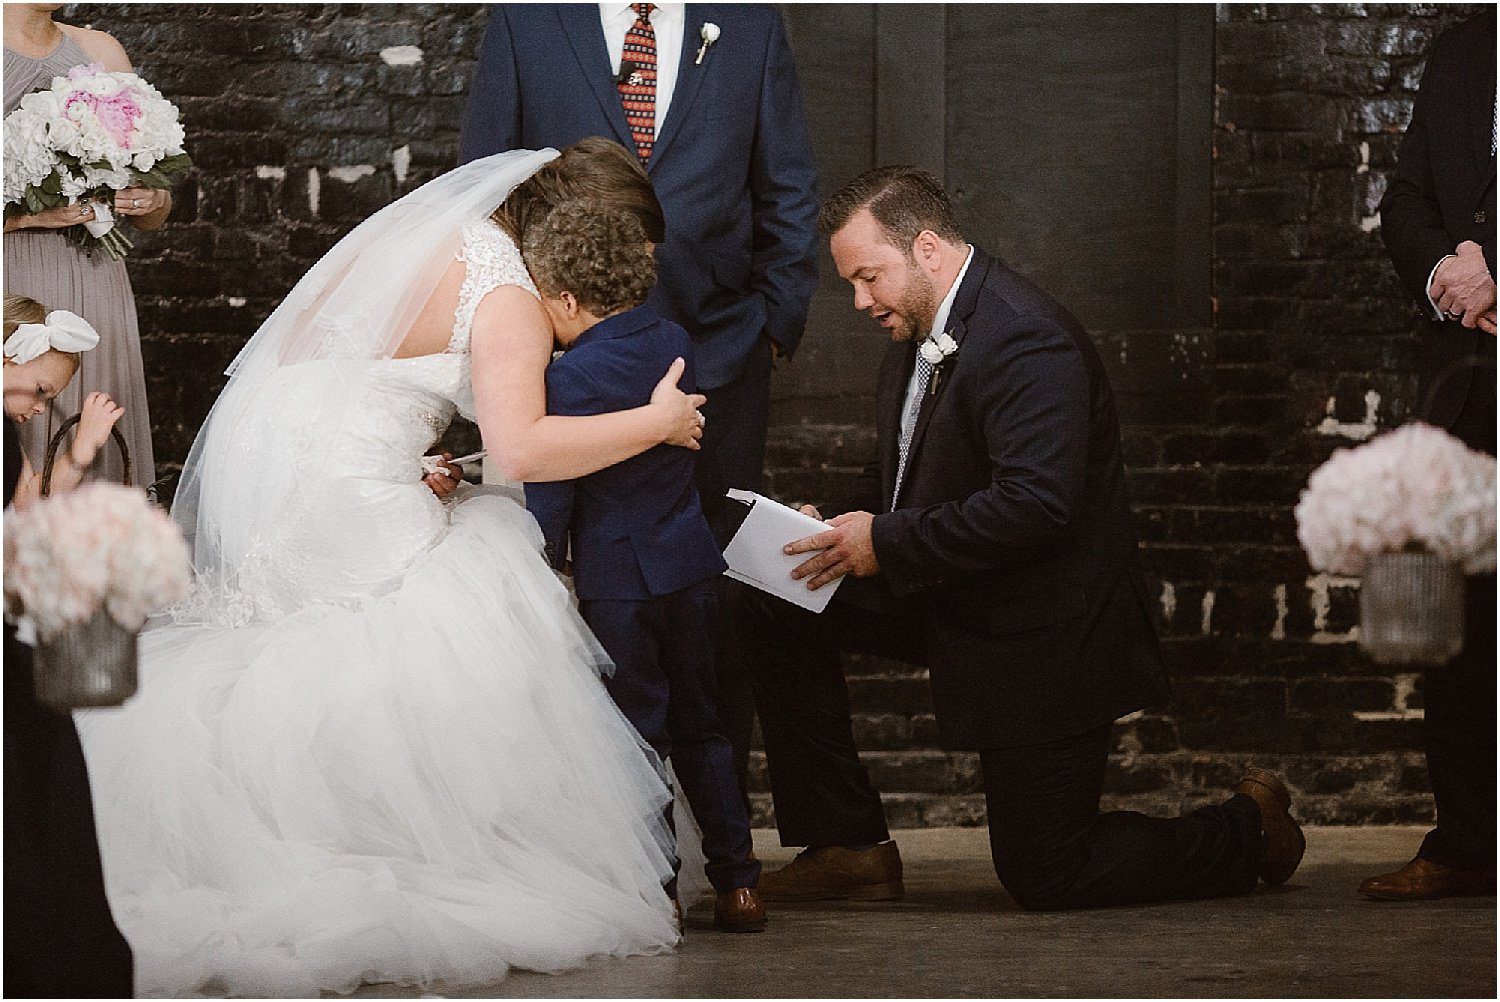 Reading Wedding vows at Jackson Terminal in Knoxville